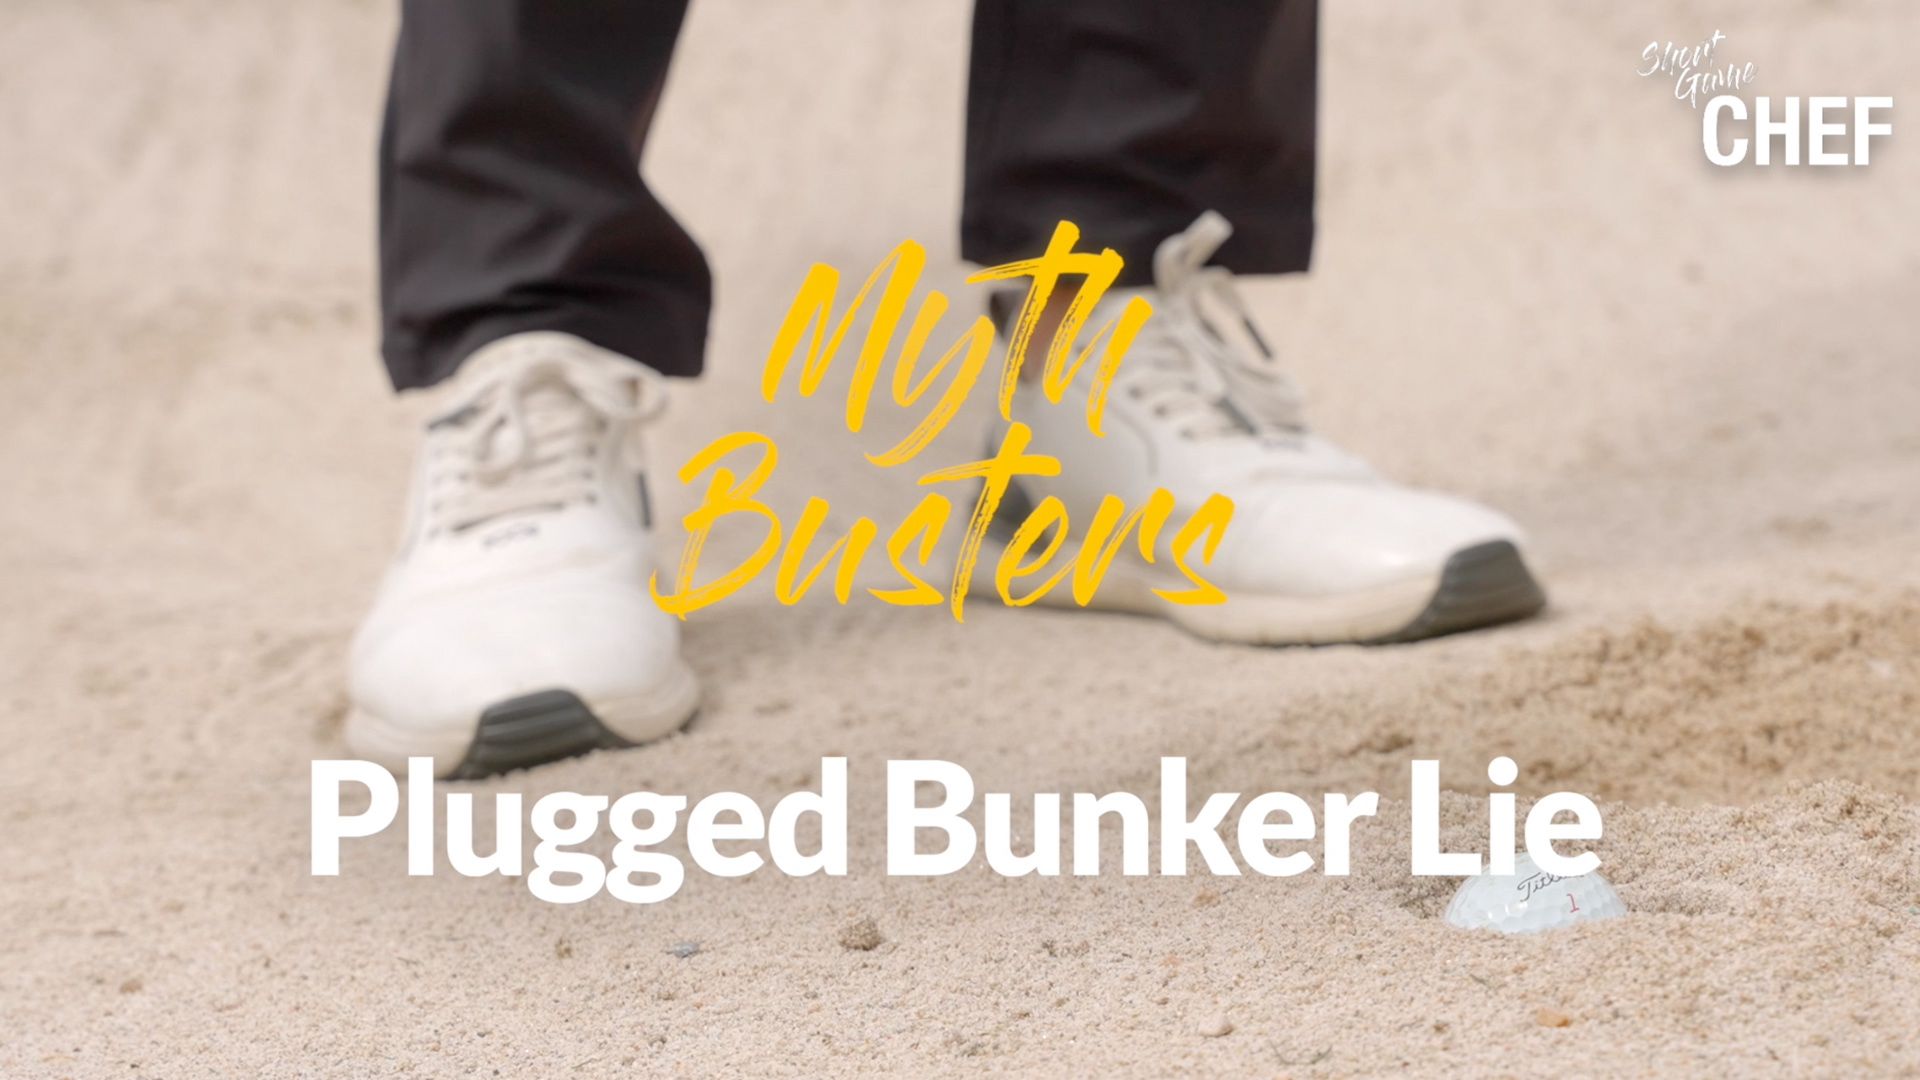 Modernize your short game with these tips for a plugged bunker lie